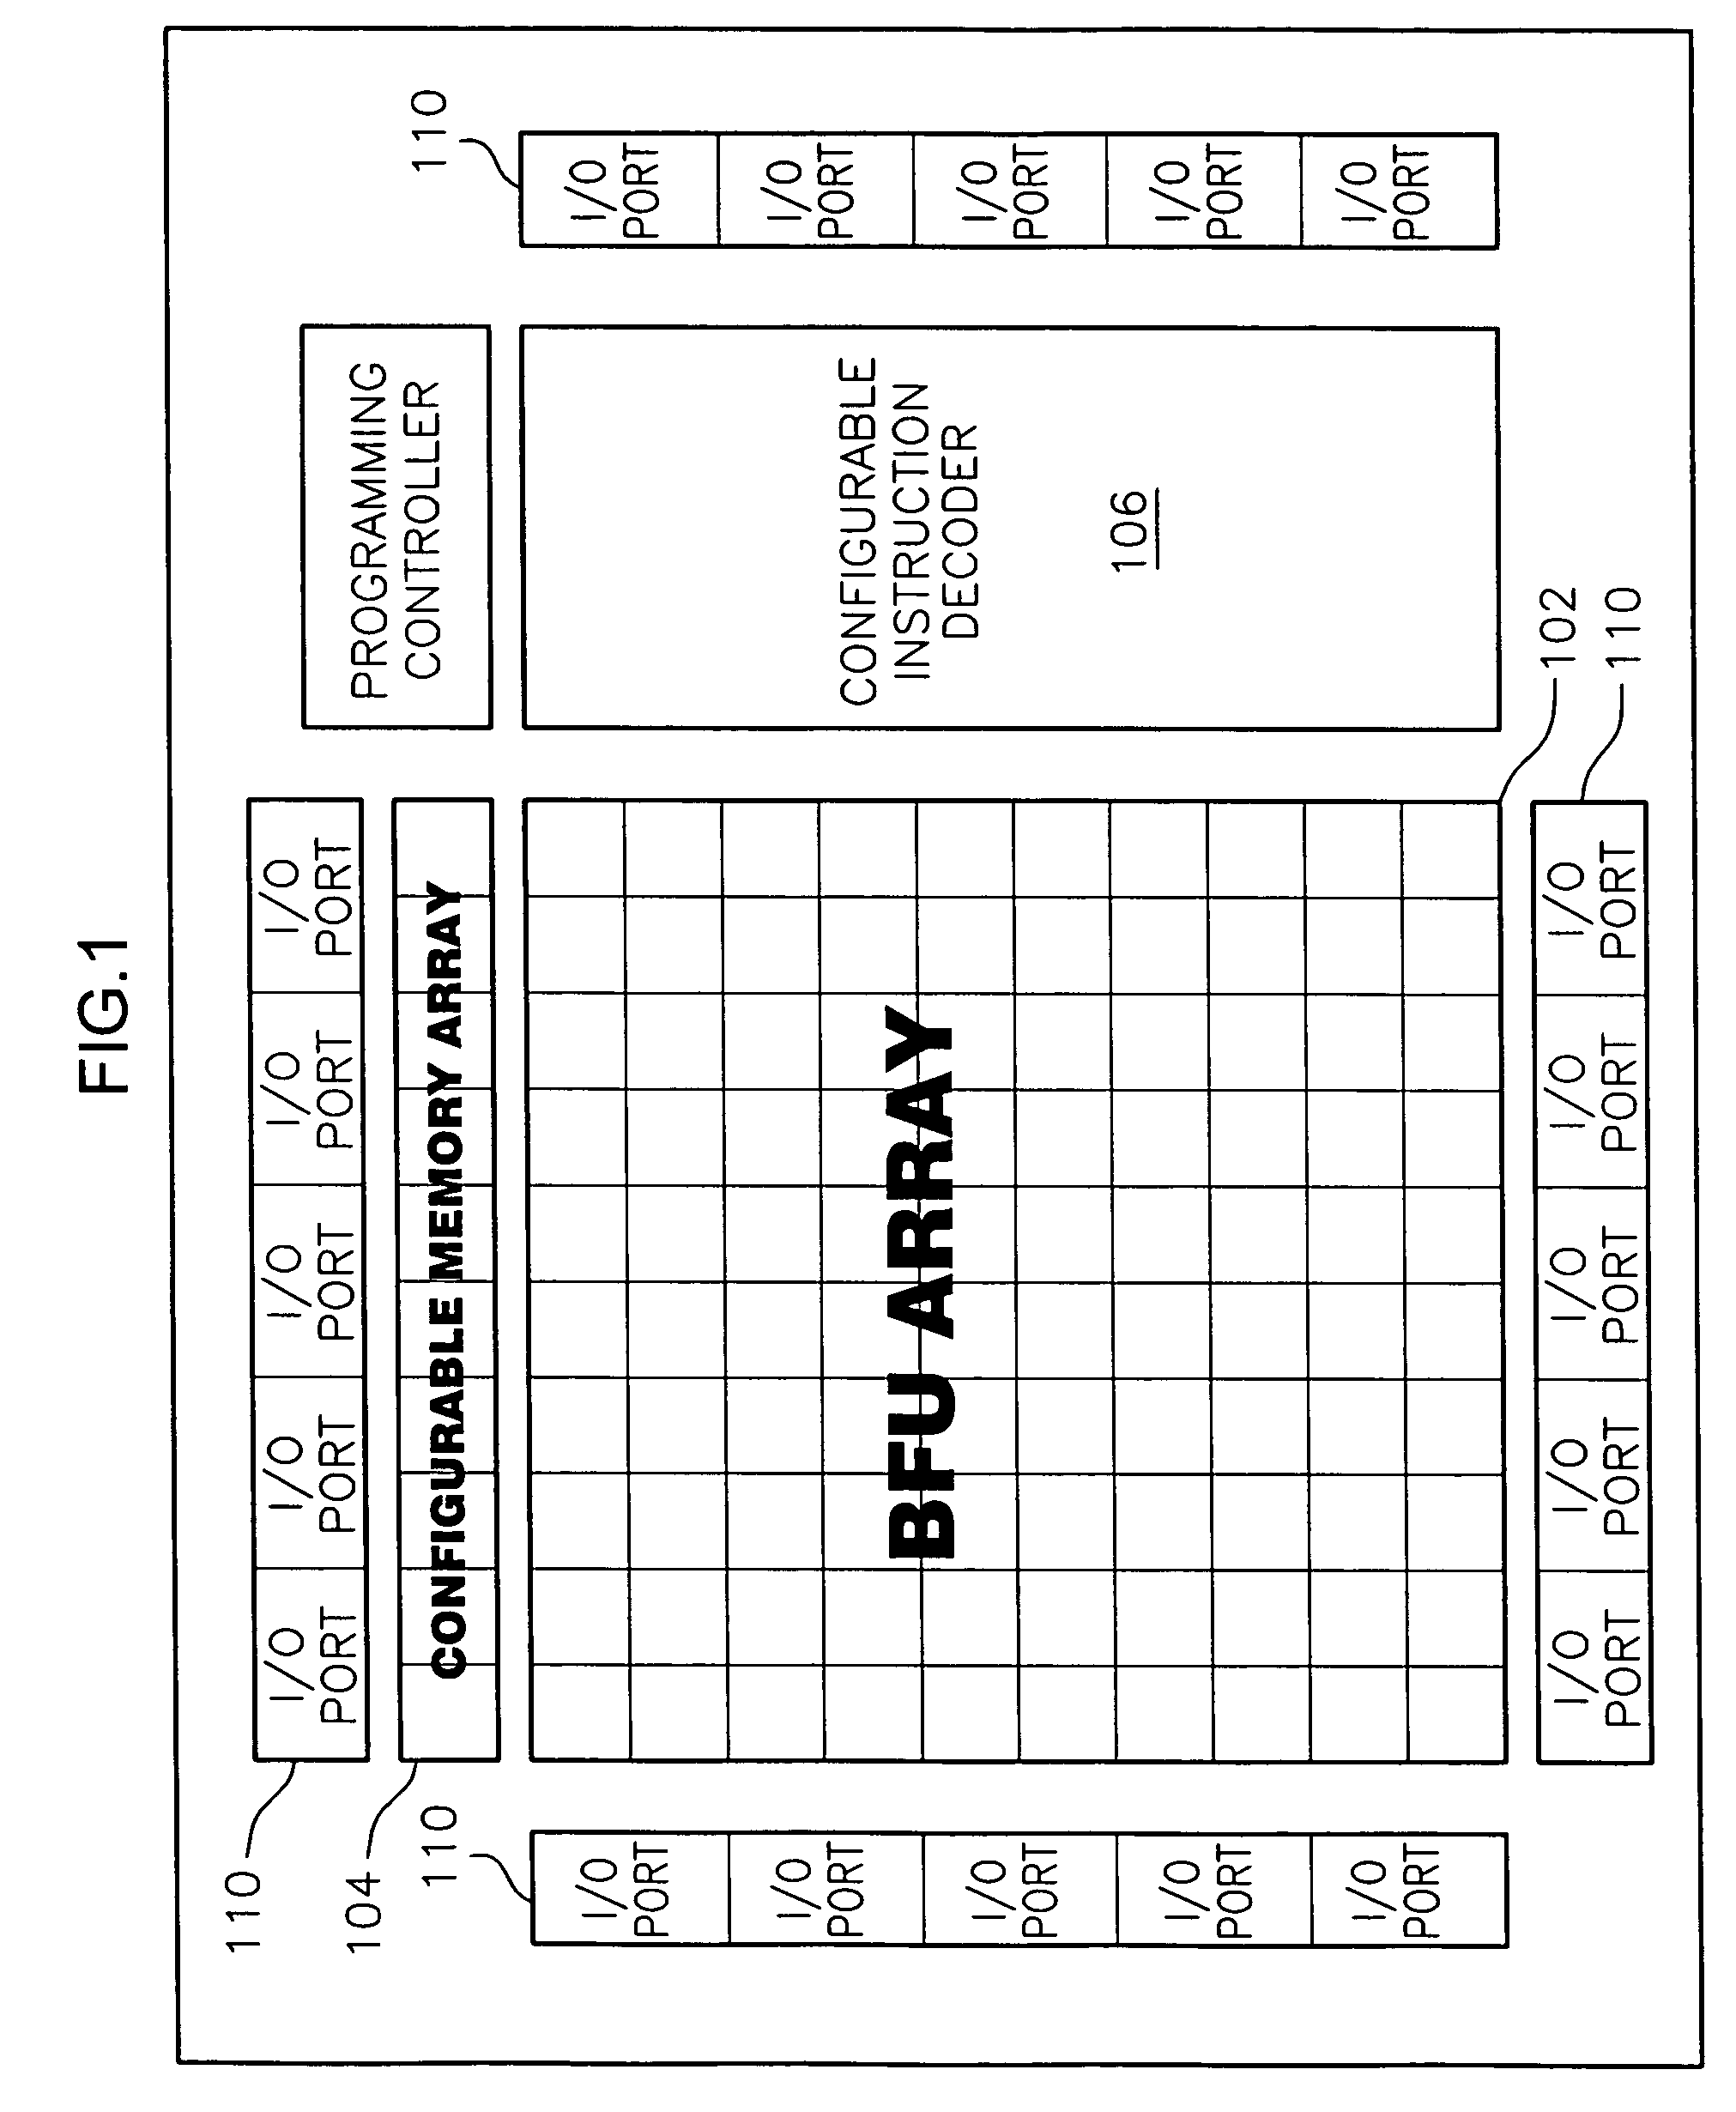 System and method for preparing software for execution in a dynamically configurable hardware environment